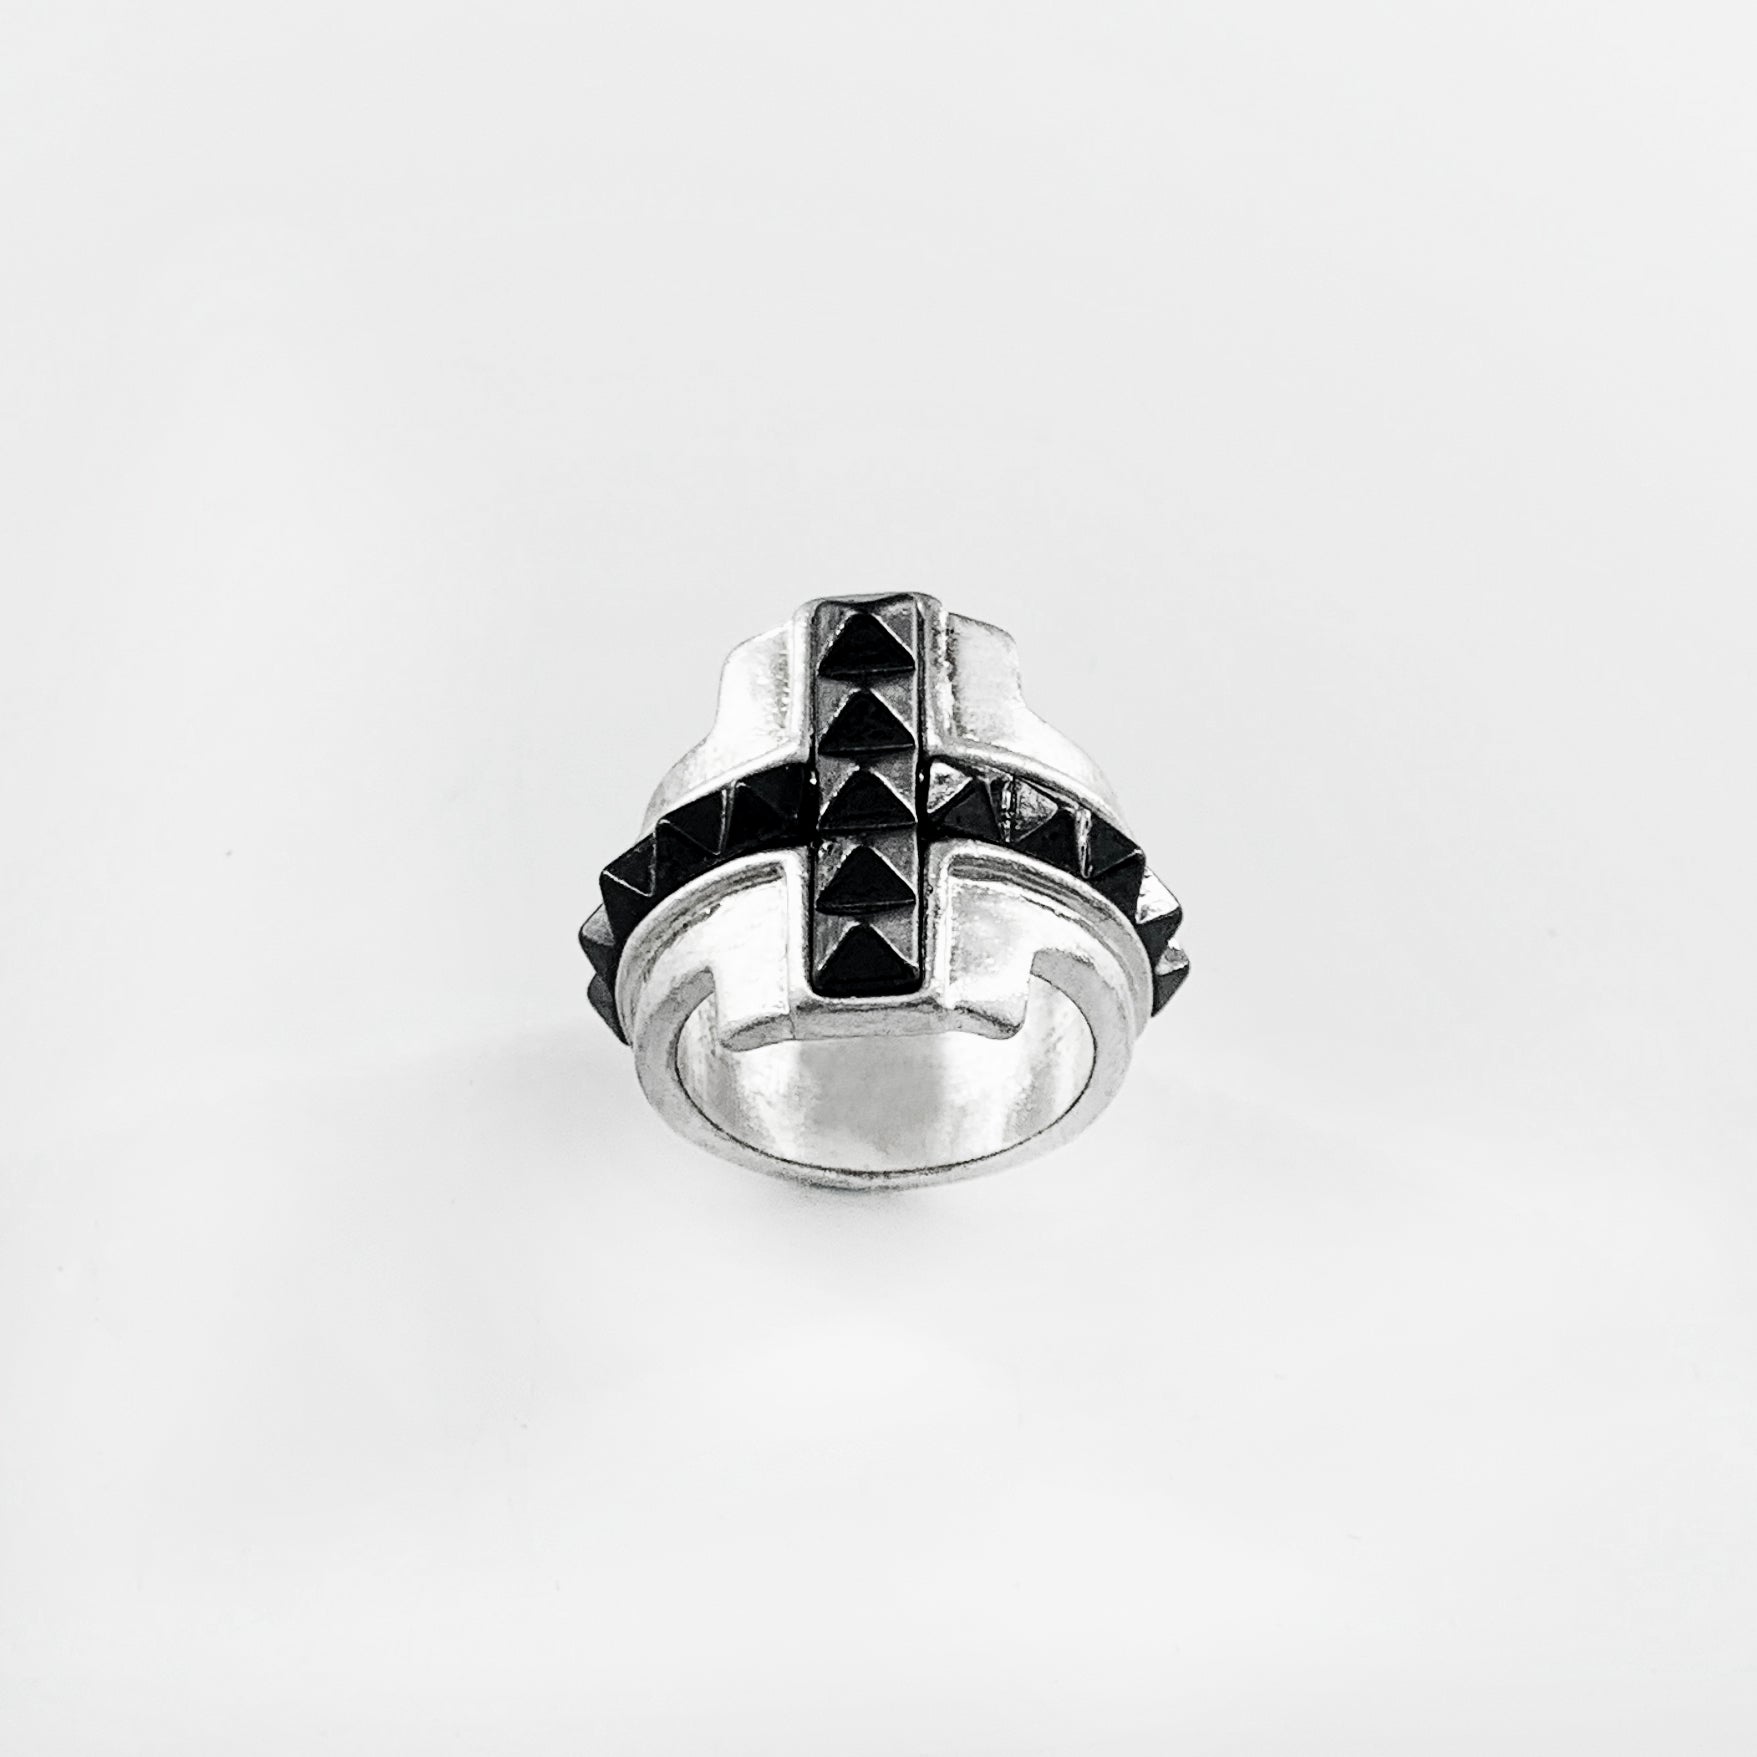 Silver ring with black studded cross